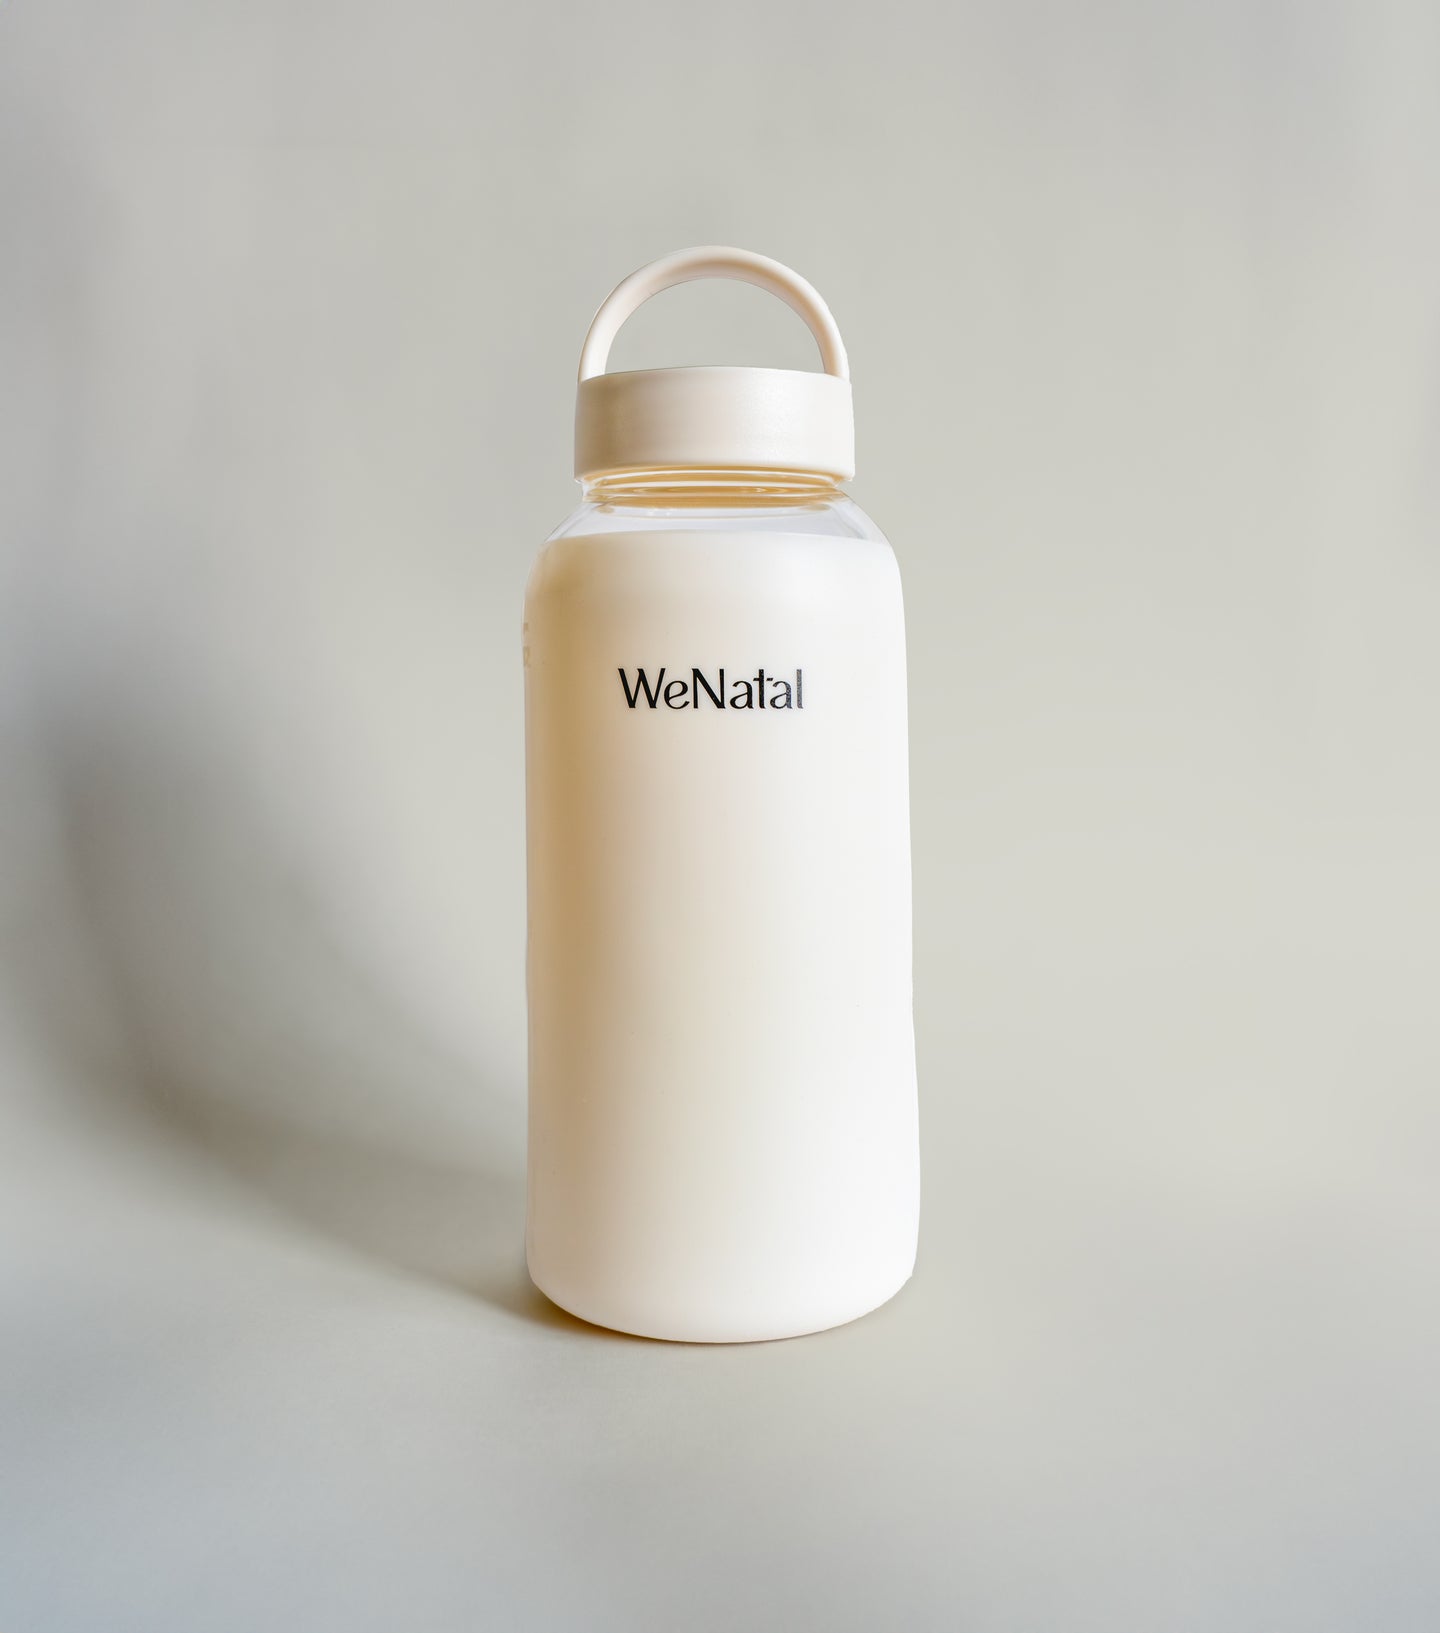 WeNatal waterbottle whole body picture on a white background